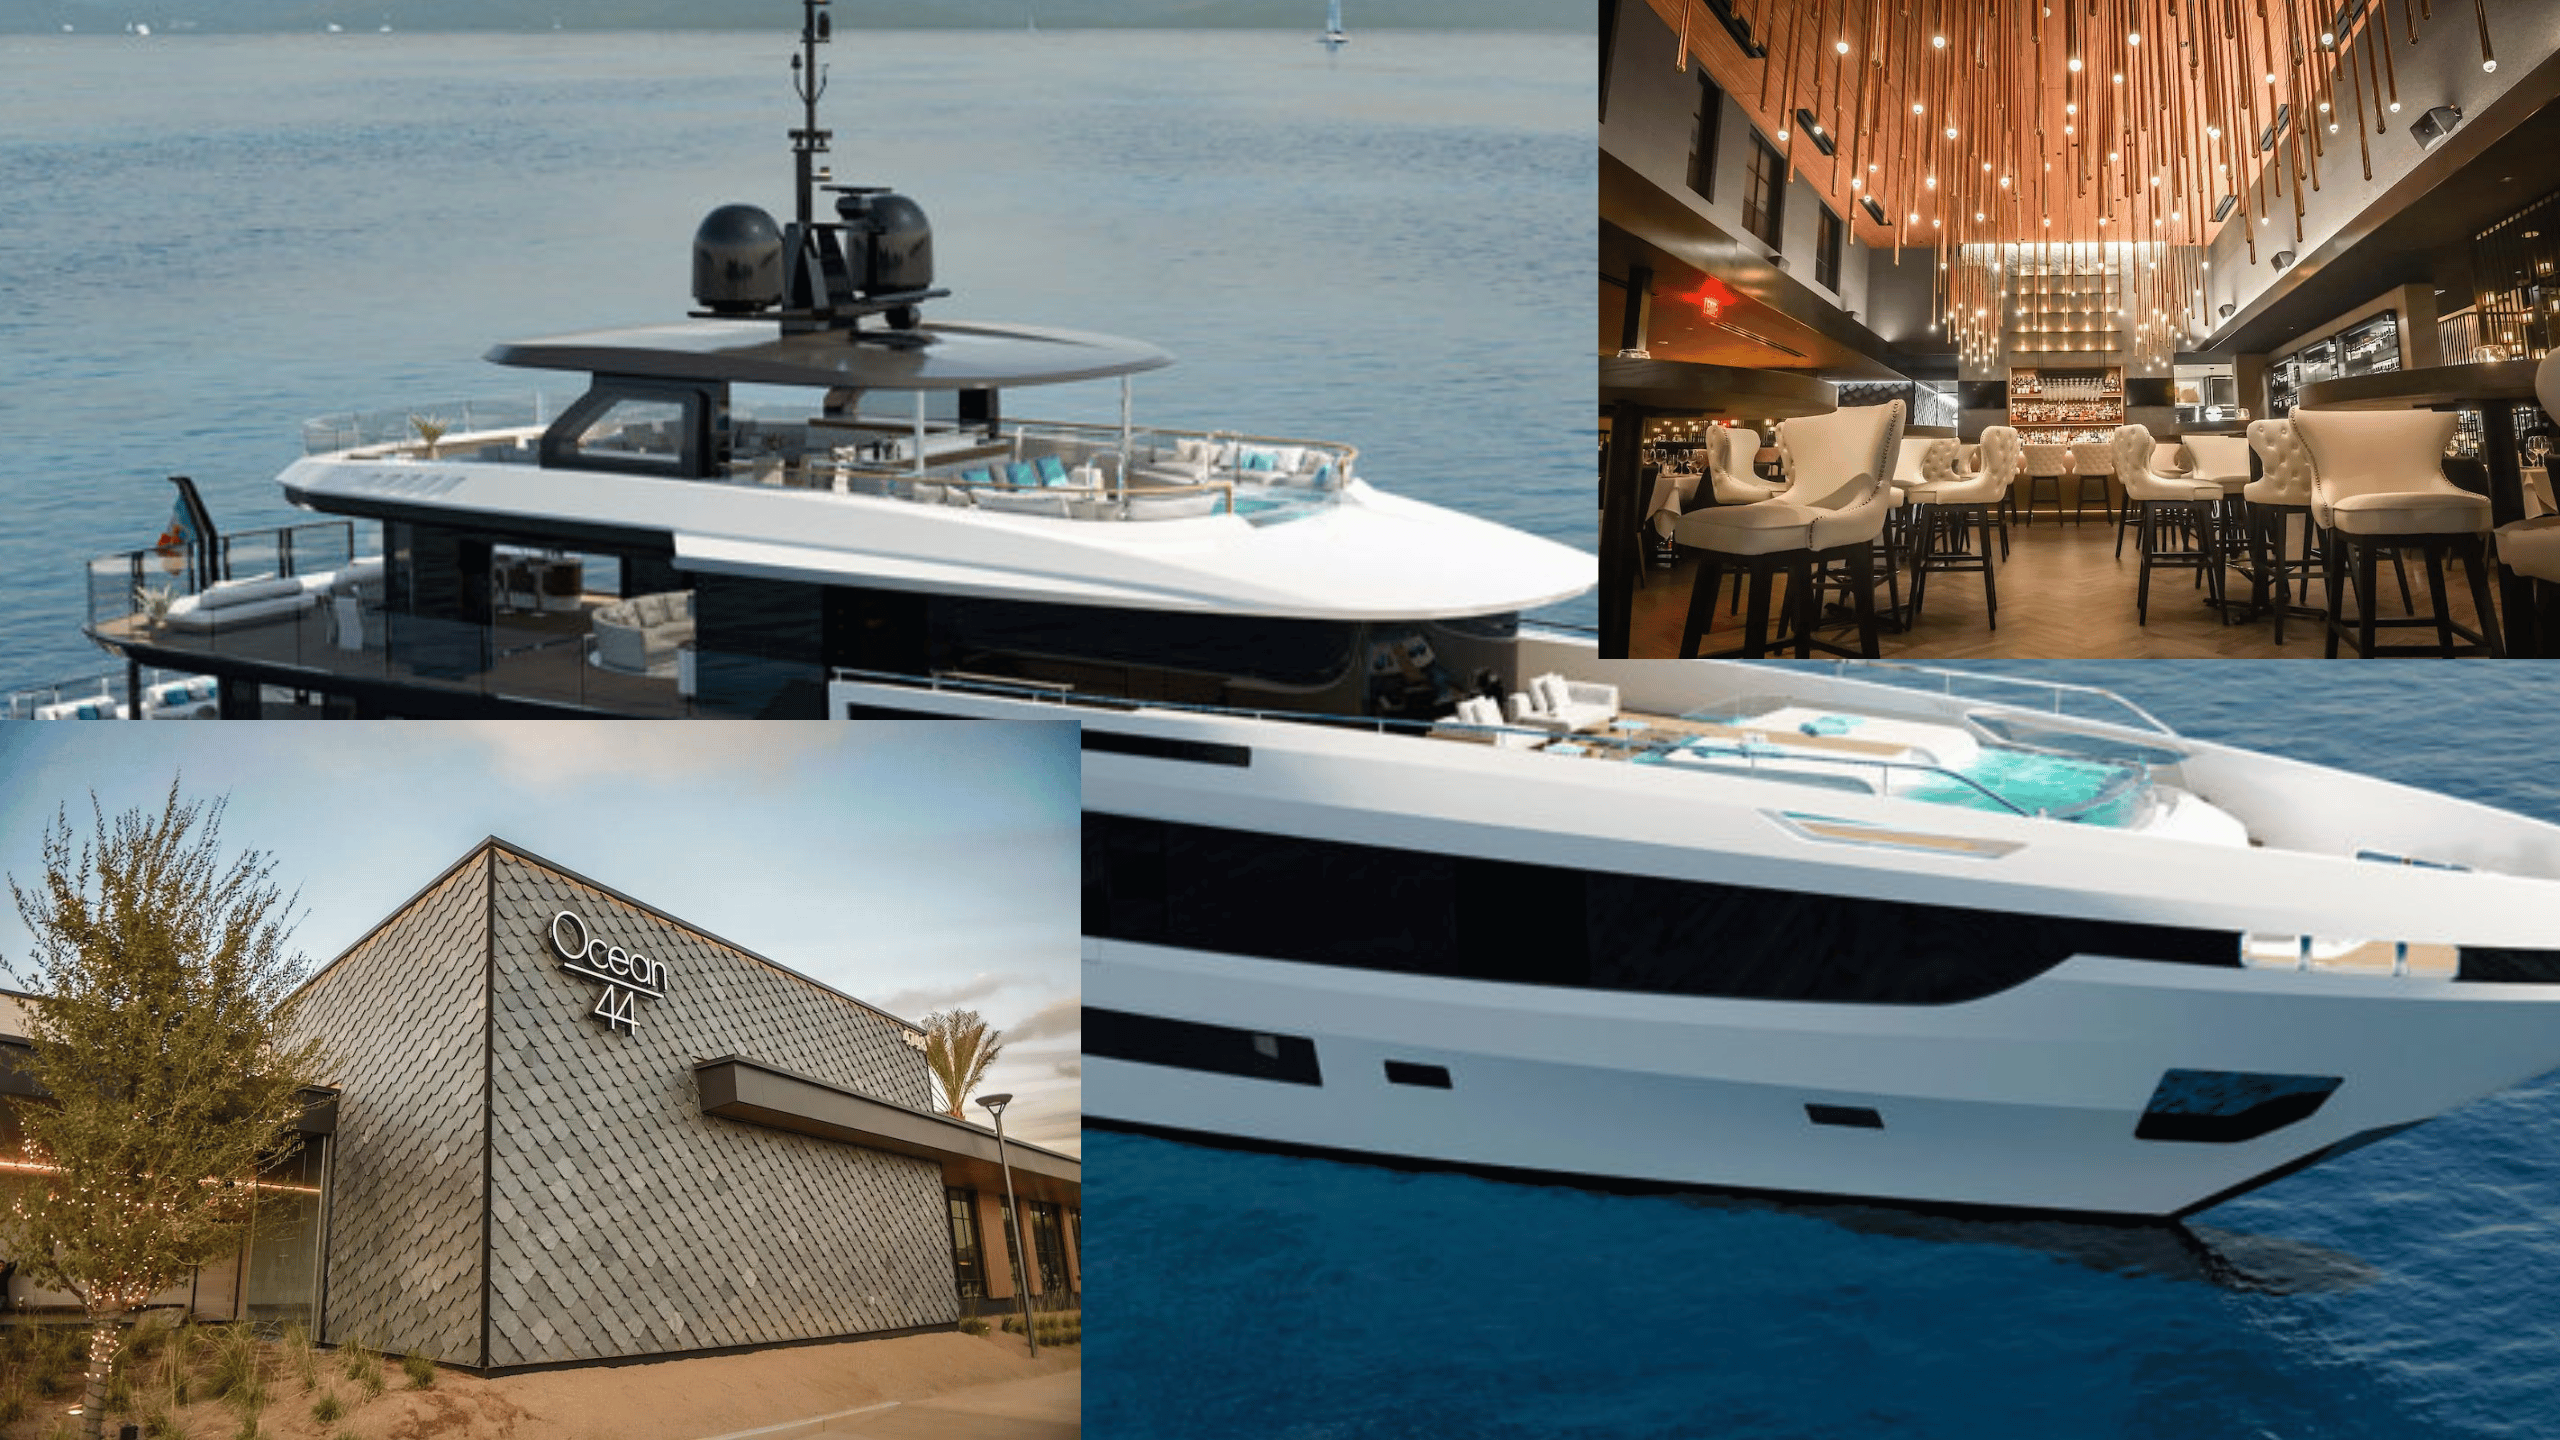 Ocean 44 Yacht & Restaurant: Unparalleled Fusion of Luxury and Flavor